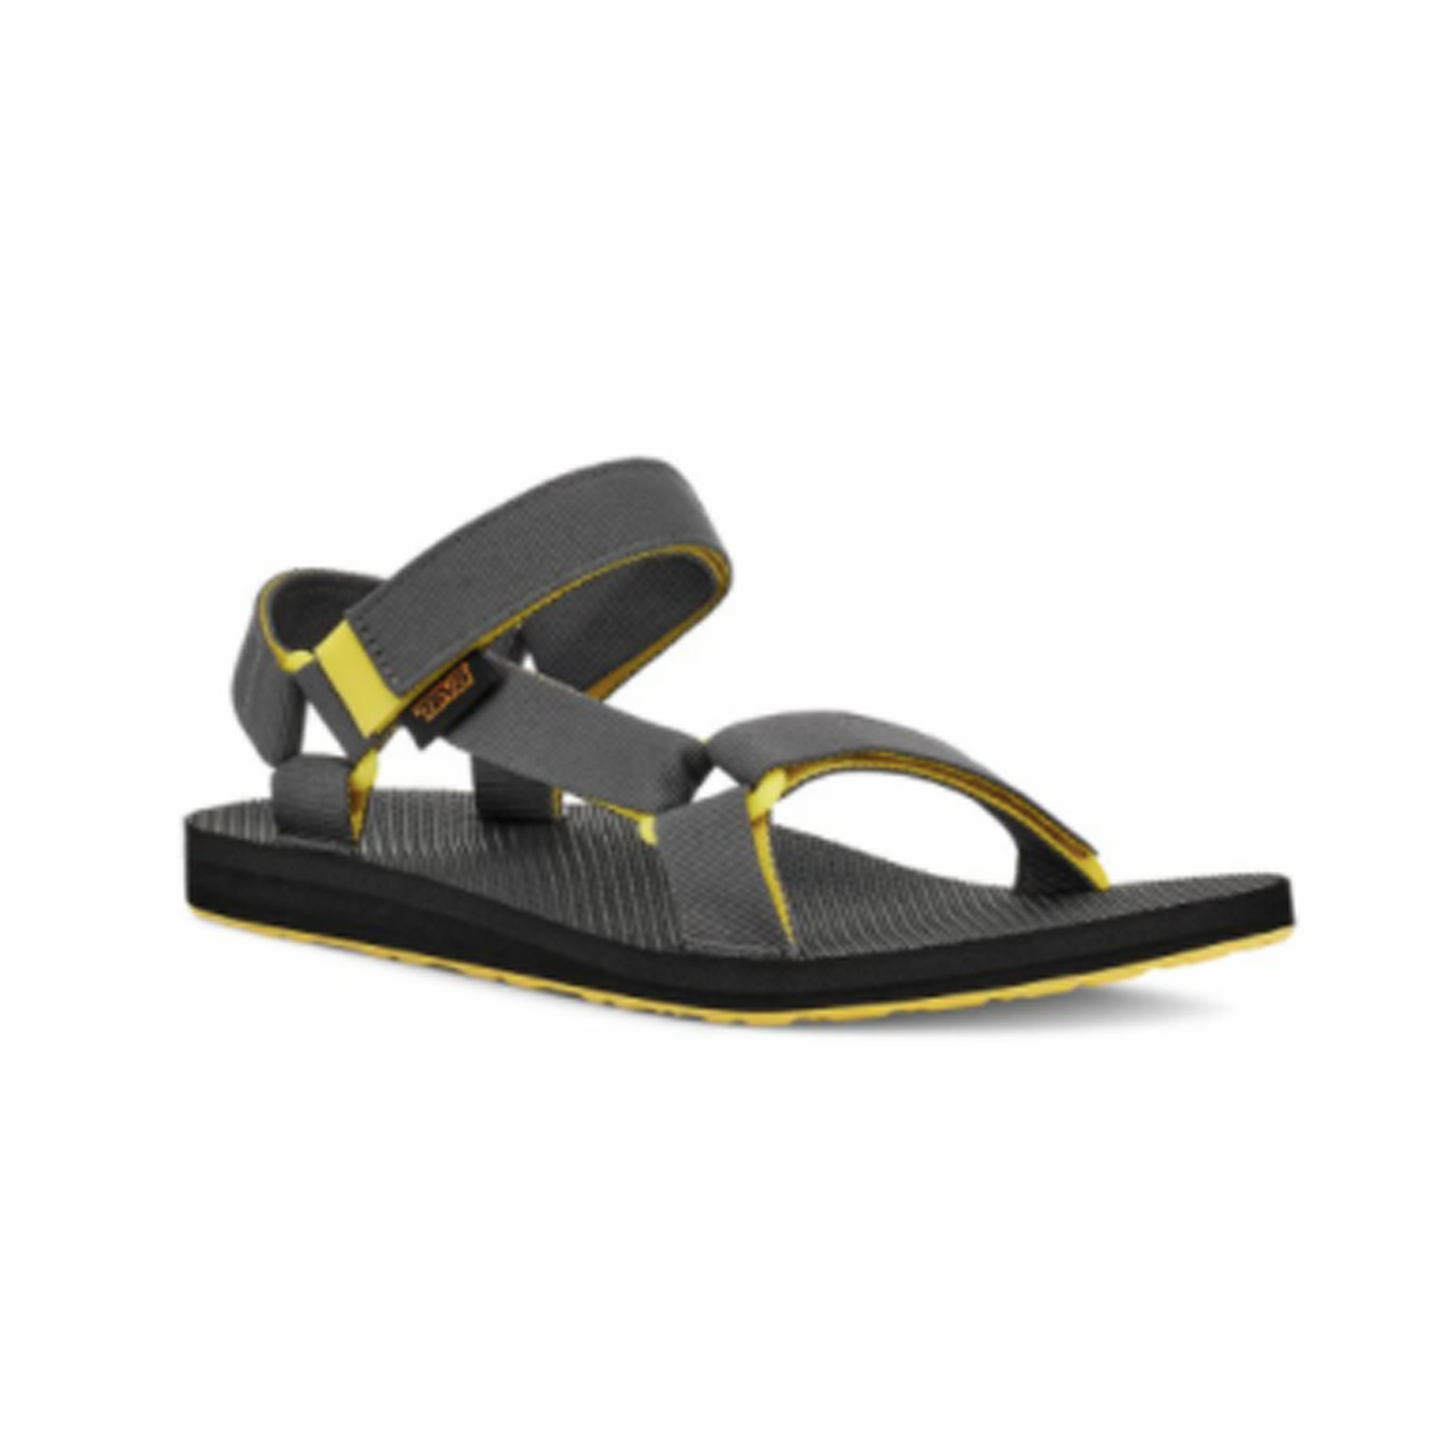 Men's Original Universal Sandal in colours grey and yellow.